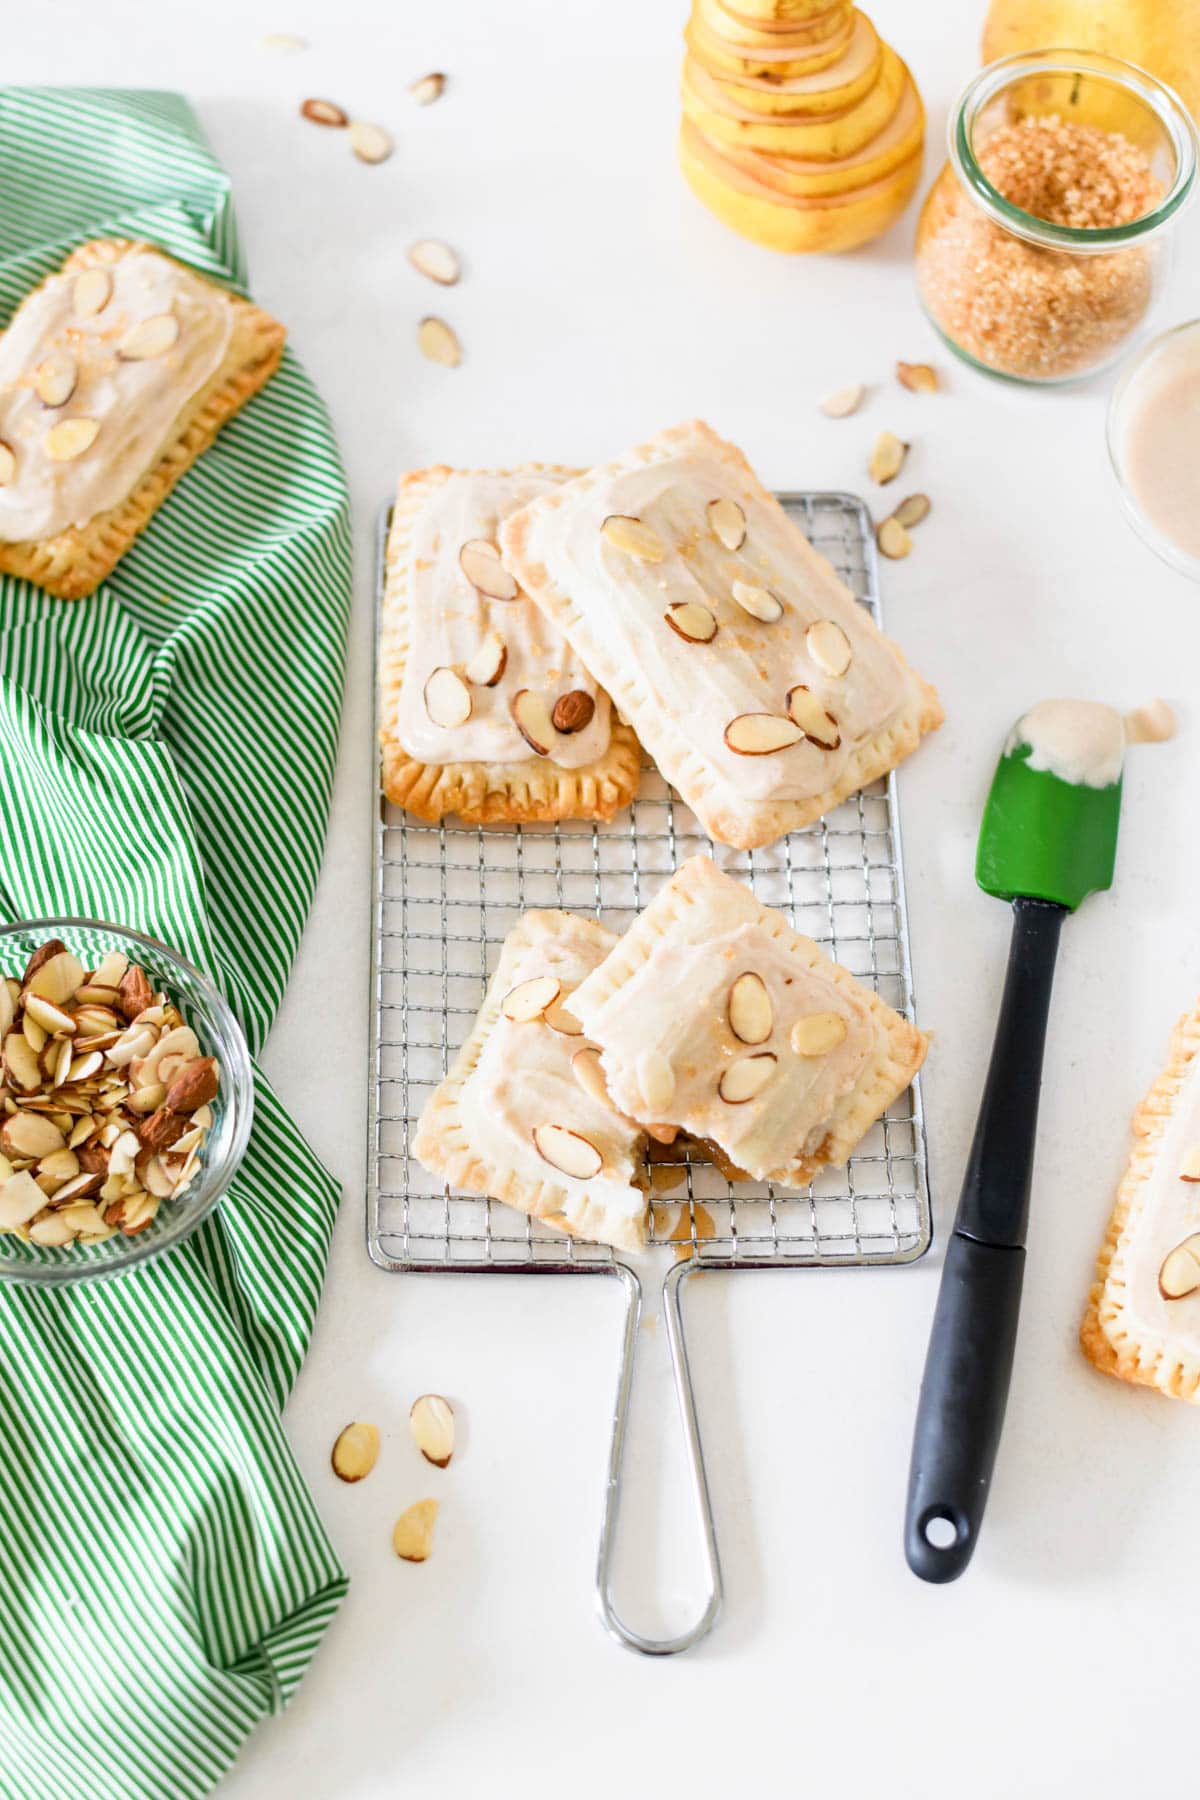 Homemade Spiced Pear Breakfast Pastries